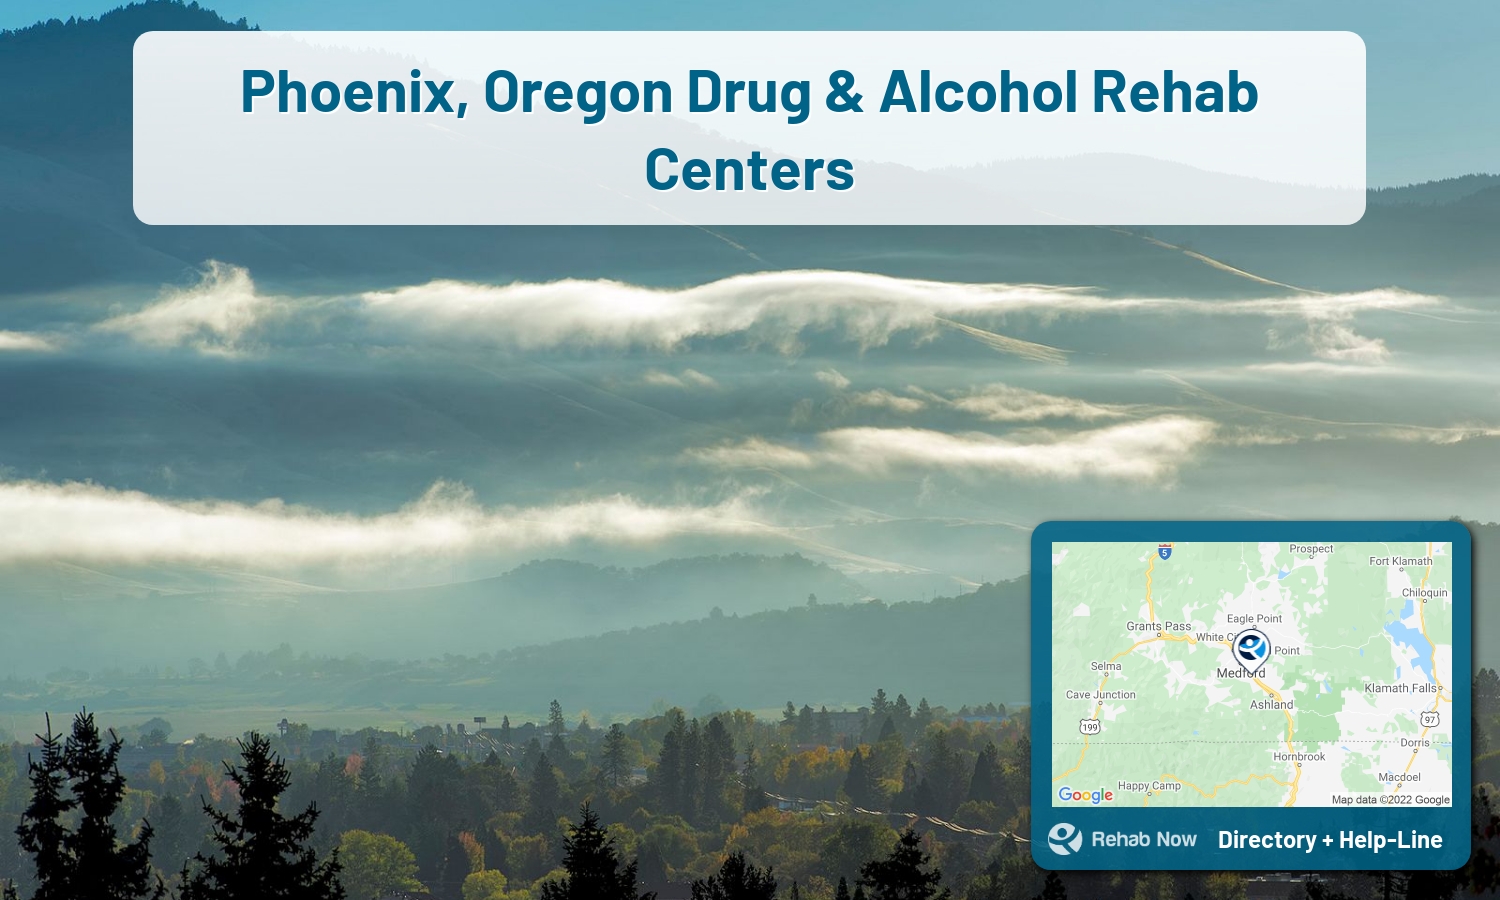 Let our expert counselors help find the best addiction treatment in Phoenix, Oregon now with a free call to our hotline.